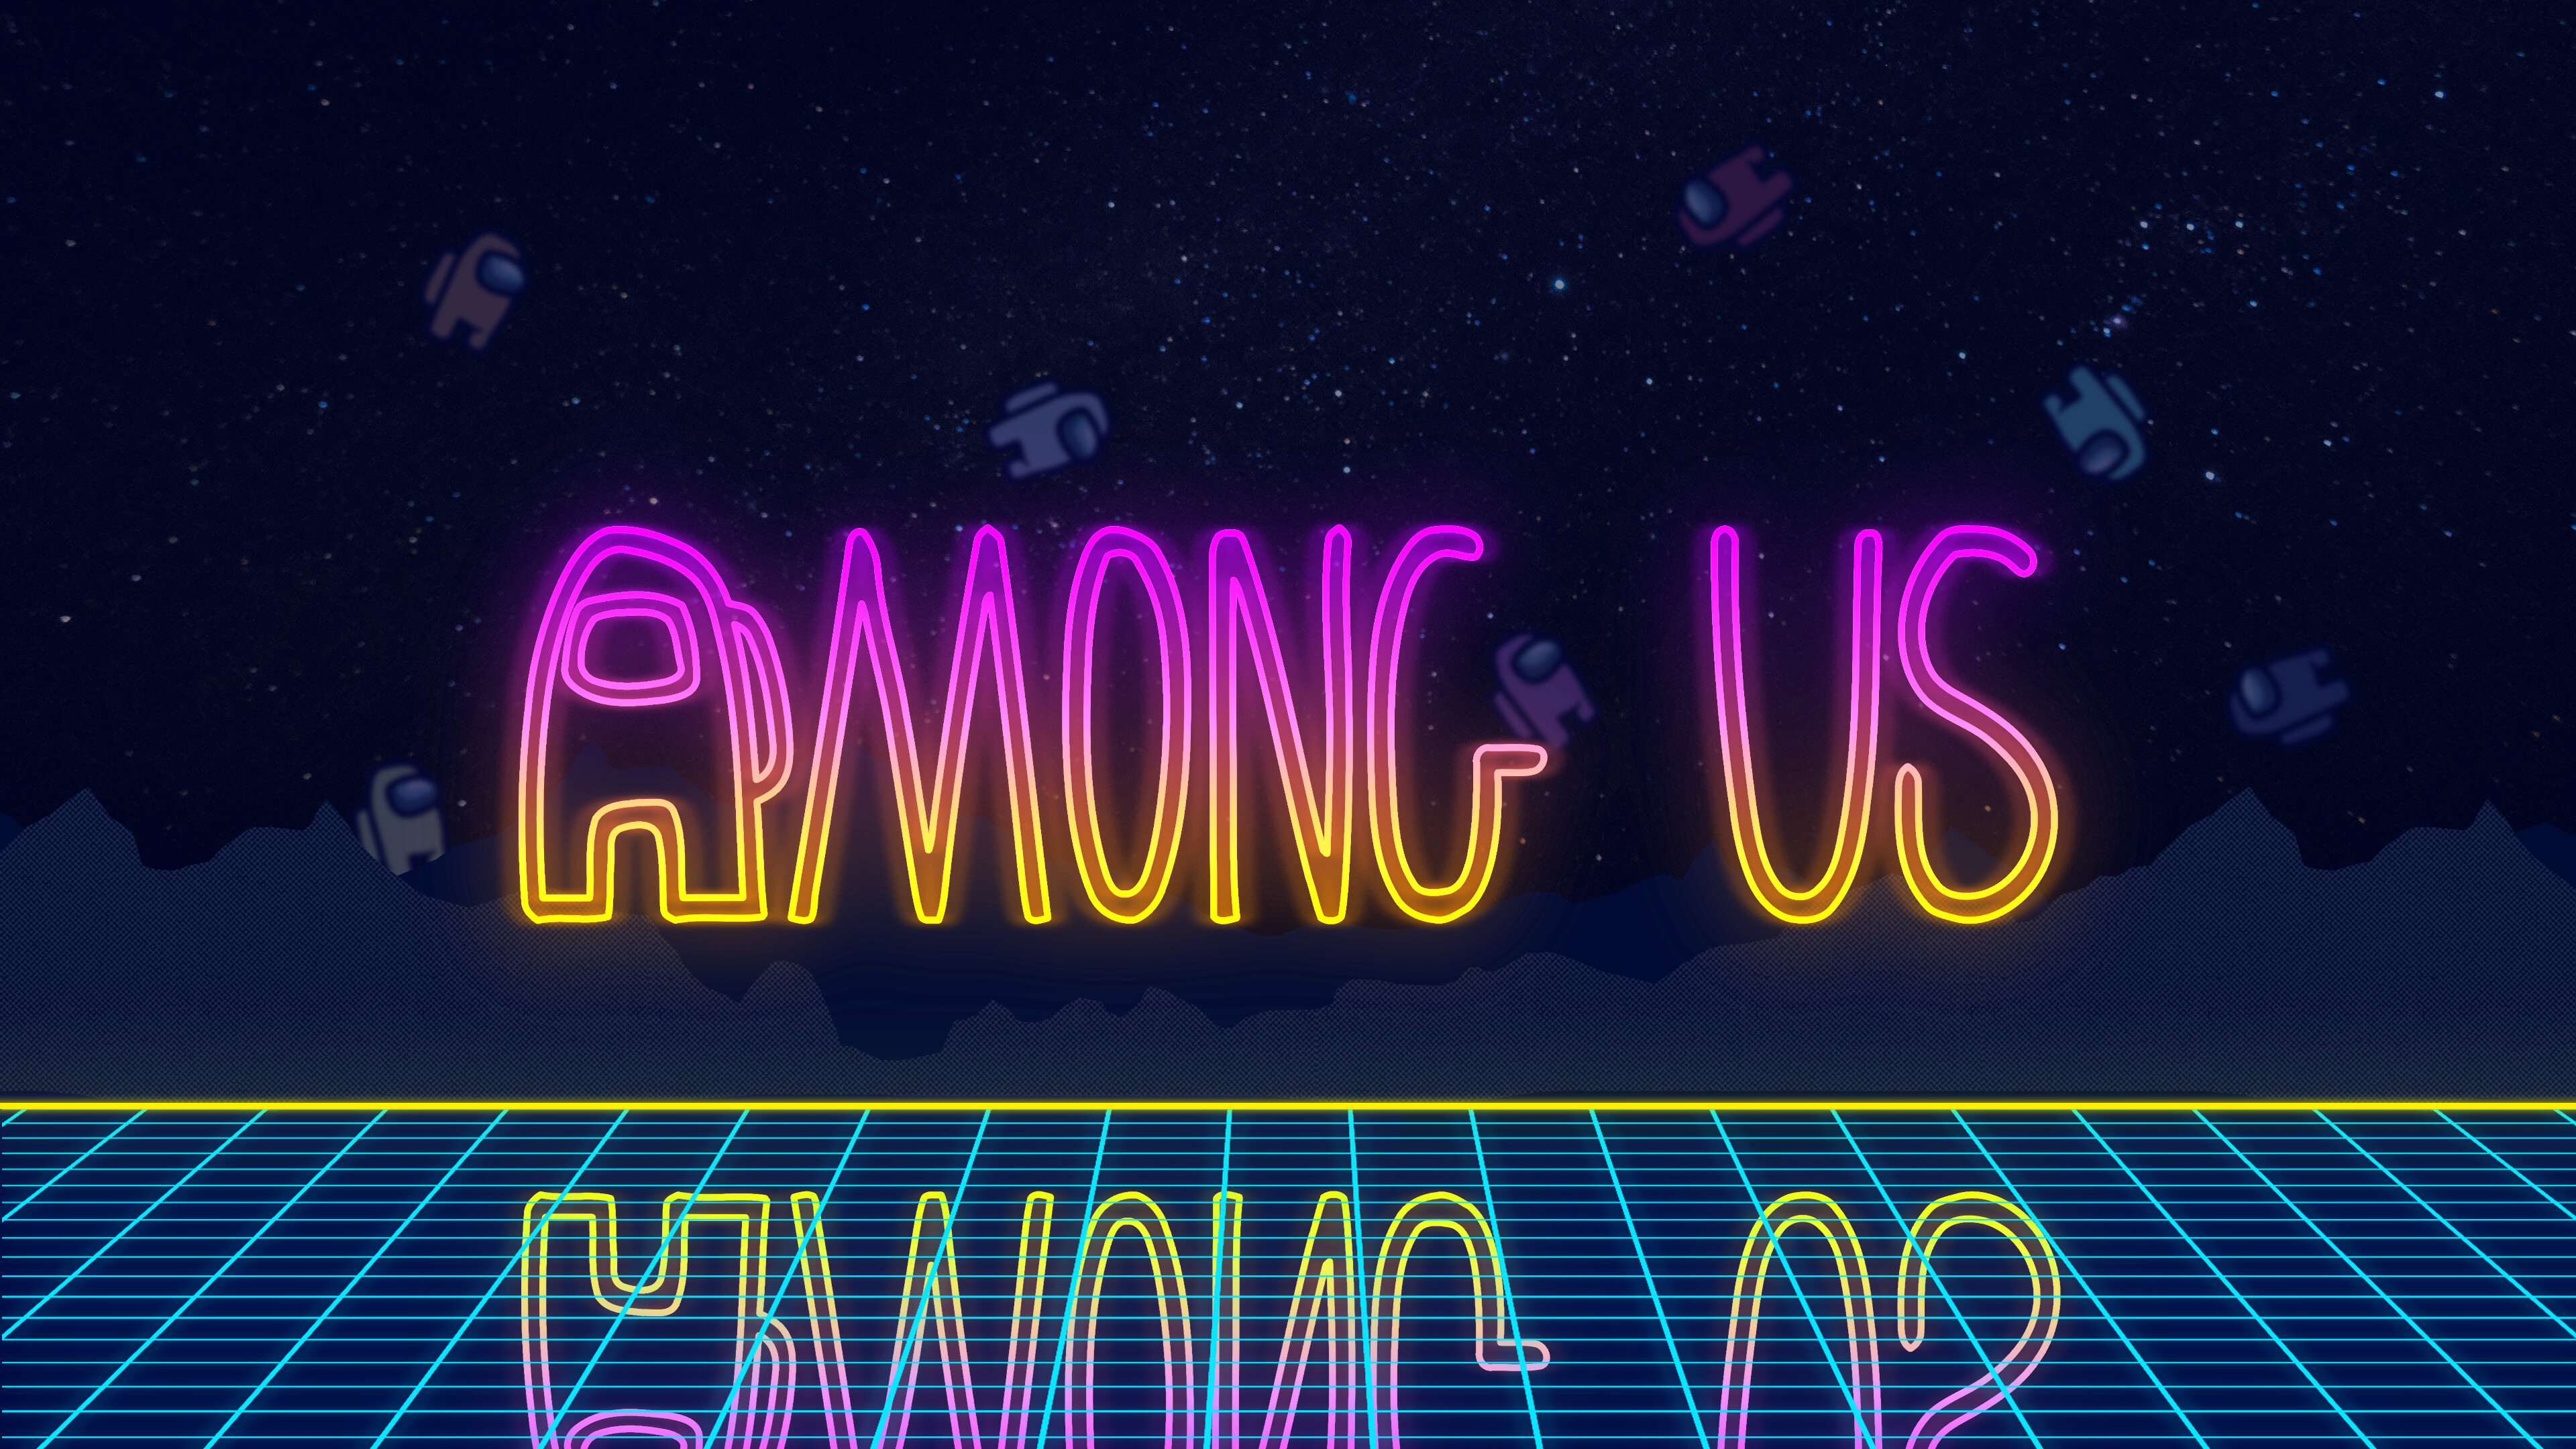 Among Us: A game developed and published by American game studio Innersloth. 3840x2160 4K Wallpaper.